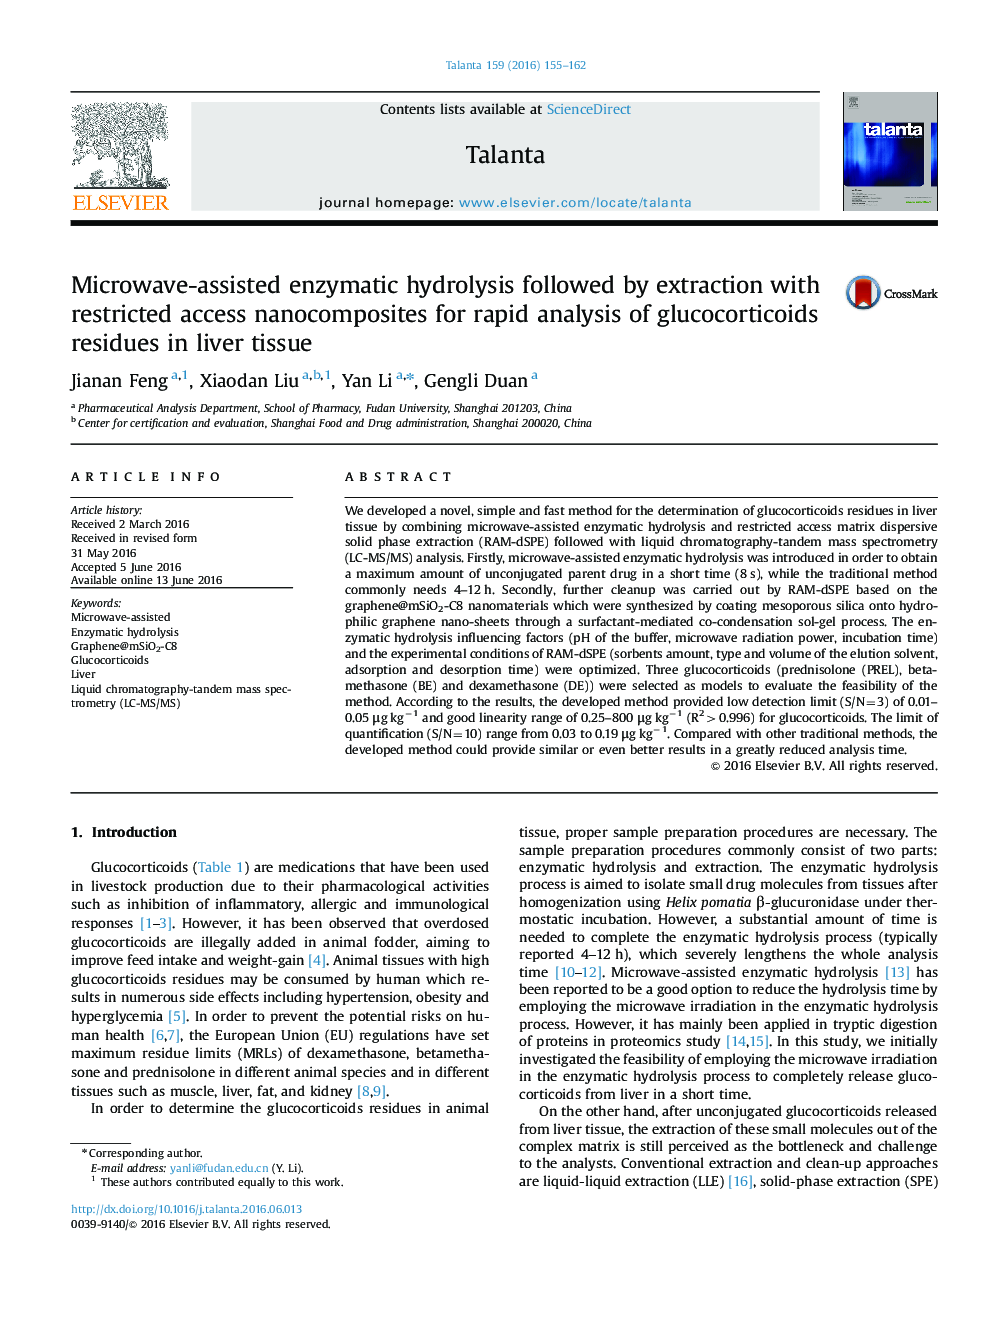 Microwave-assisted enzymatic hydrolysis followed by extraction with restricted access nanocomposites for rapid analysis of glucocorticoids residues in liver tissue